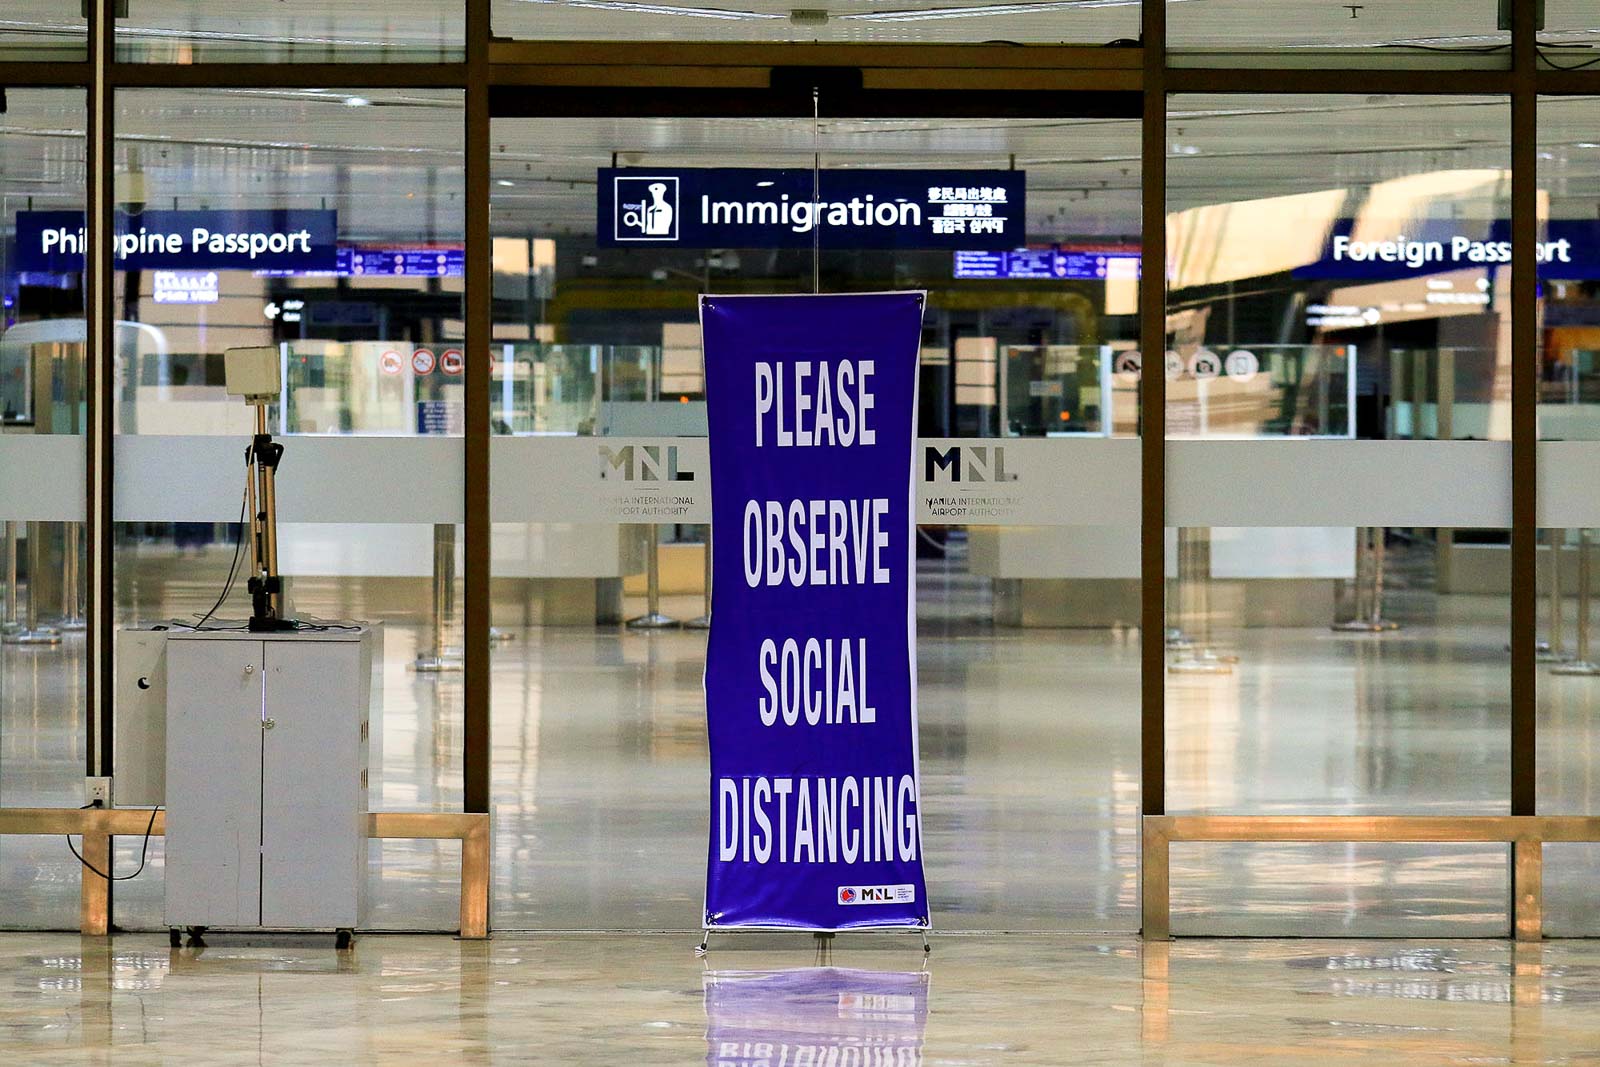 DISTANCING. The Ninoy Aquino International Airport Terminal 1 installs precautionary measures on May 8, 2020, in preparation for the general community quarantine after the enhanced community quarantine. Photo by Inoue Jaena/Rappler 